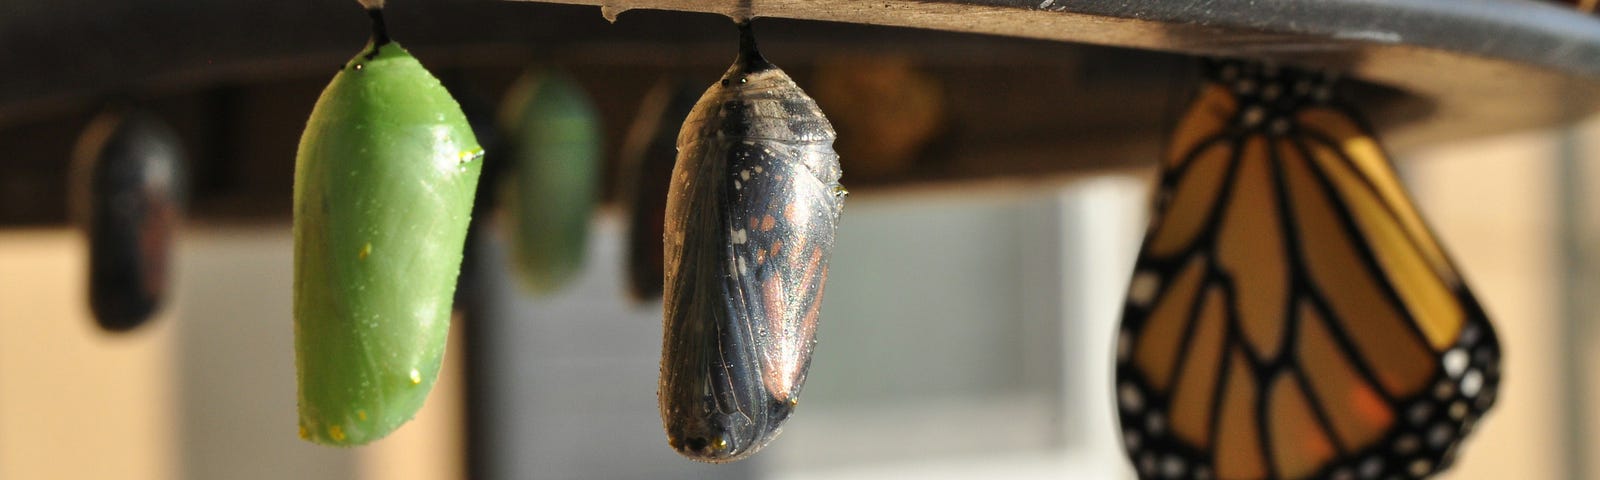 cocoons hanging, one has hatched into a monarch butterfly